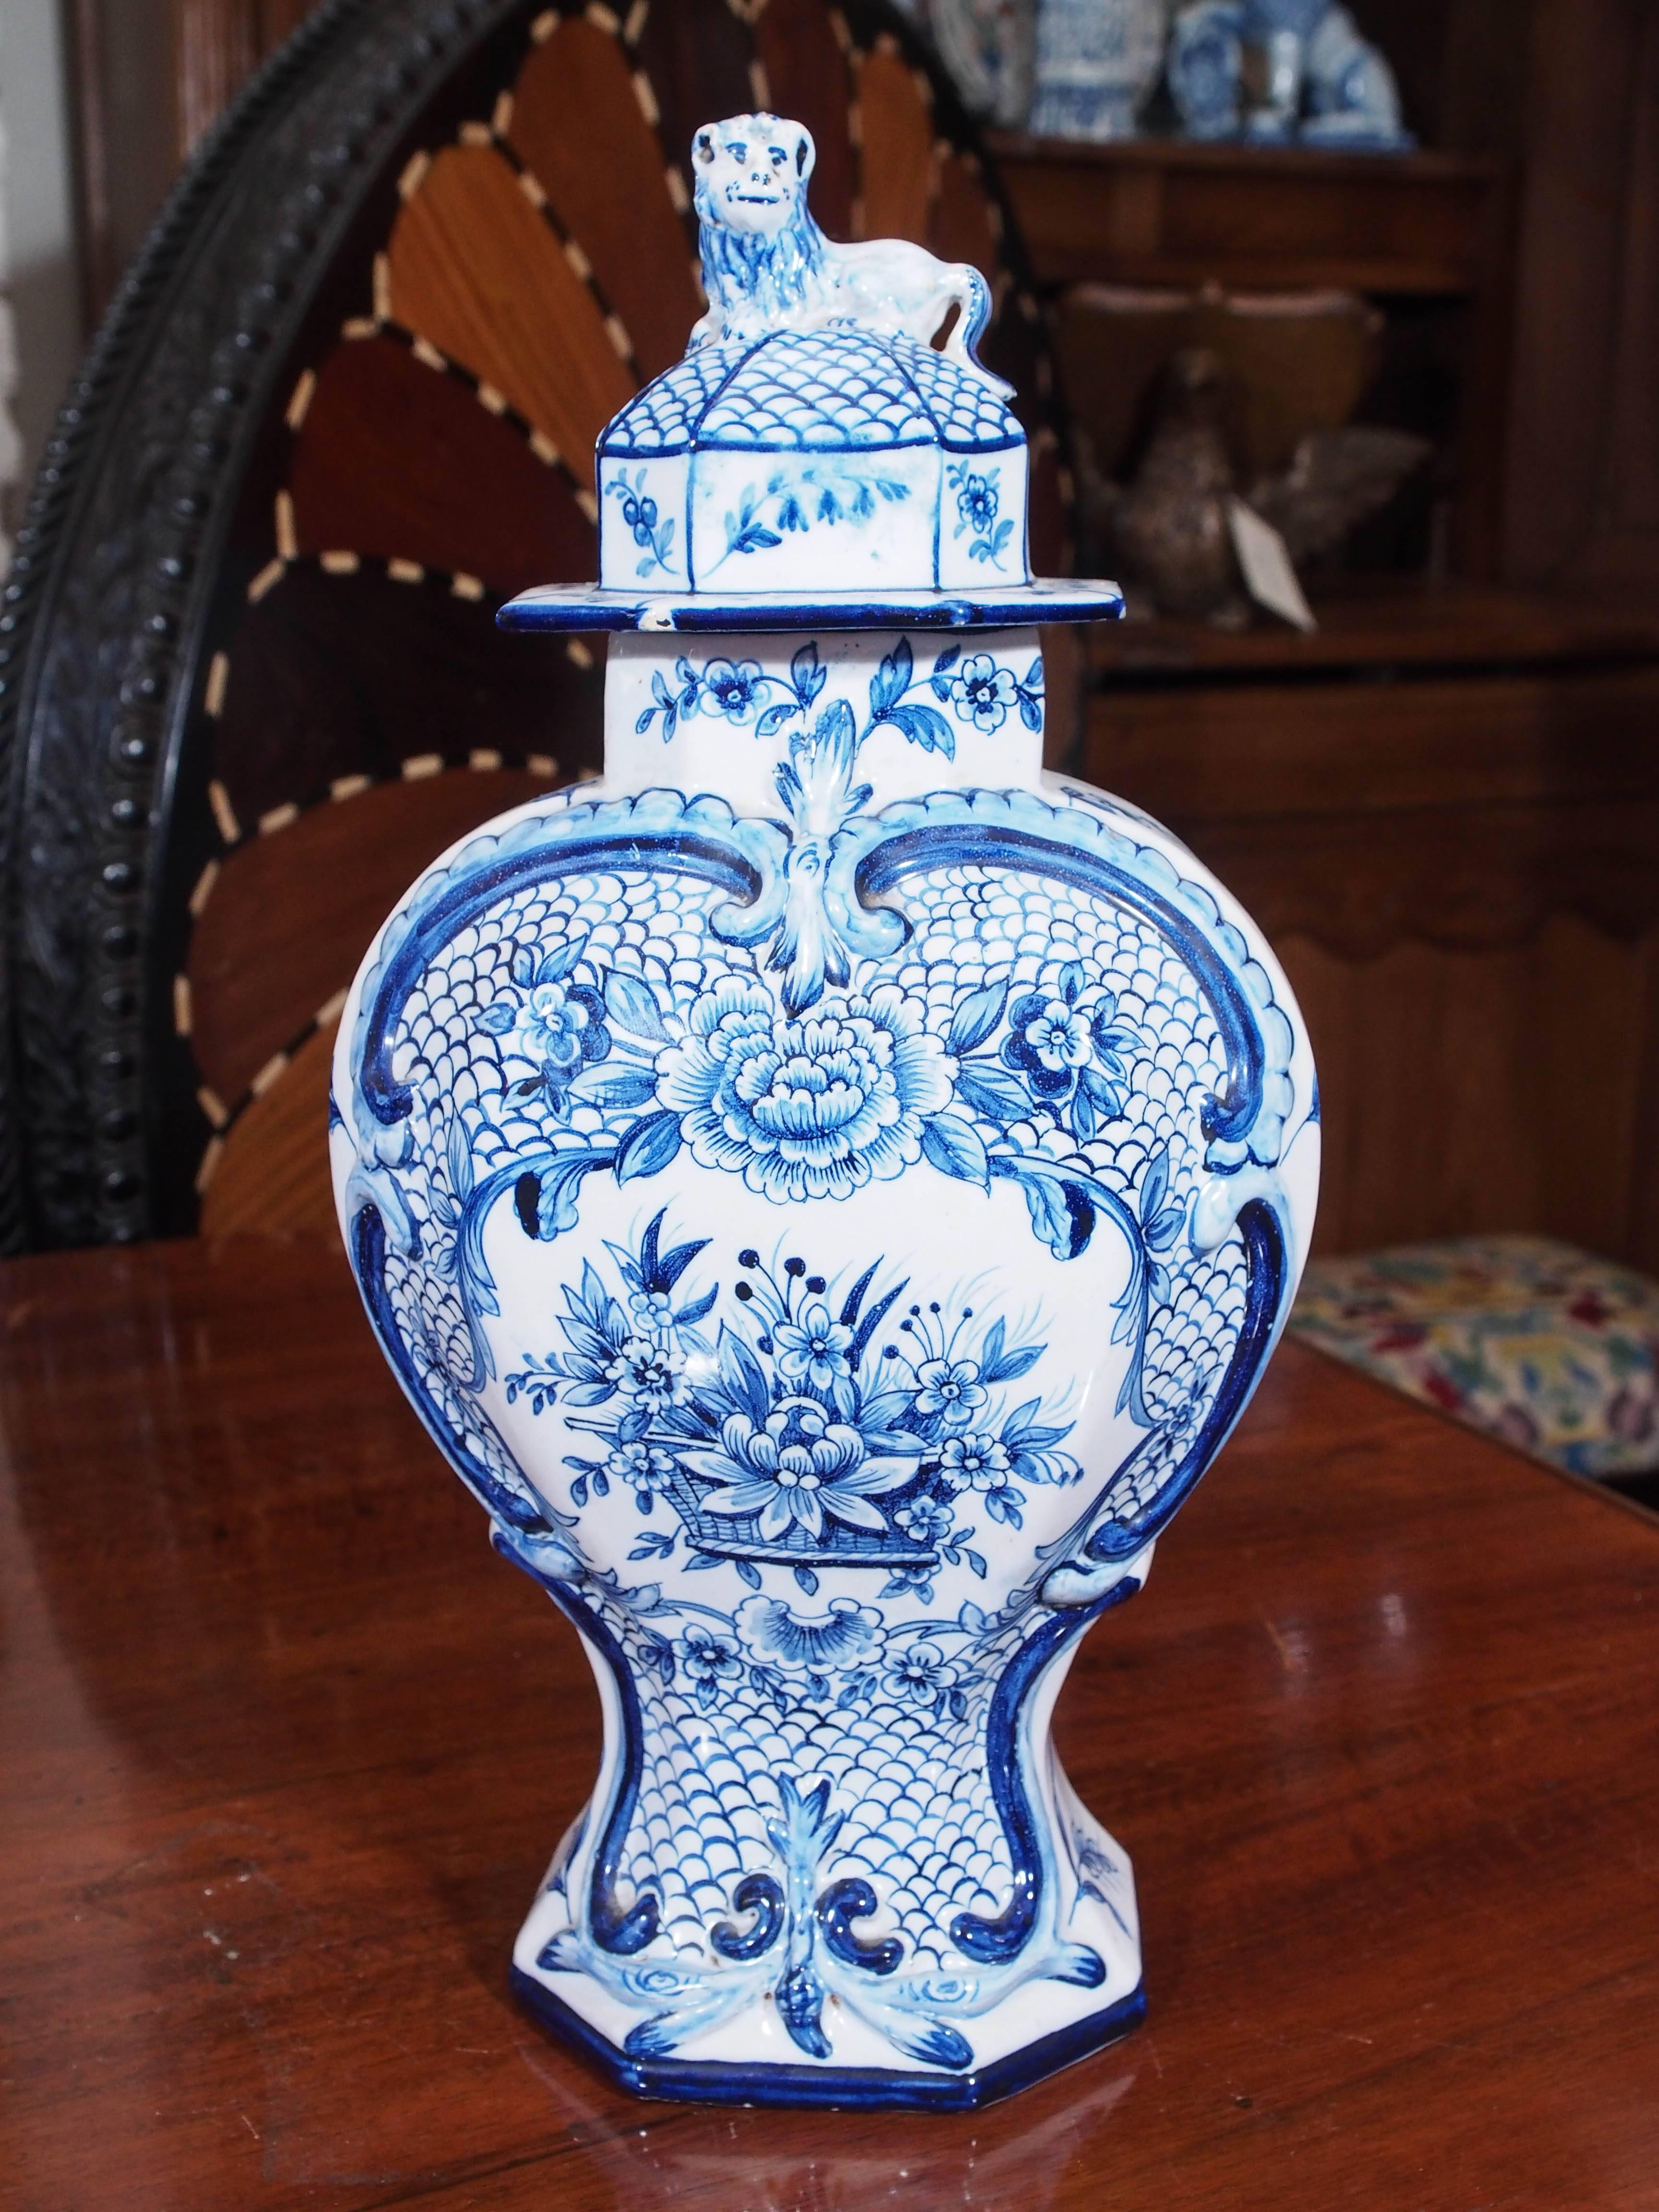 Pair of delft blue and white lidded garniture vases with lion passant finials and floral motif on breast.